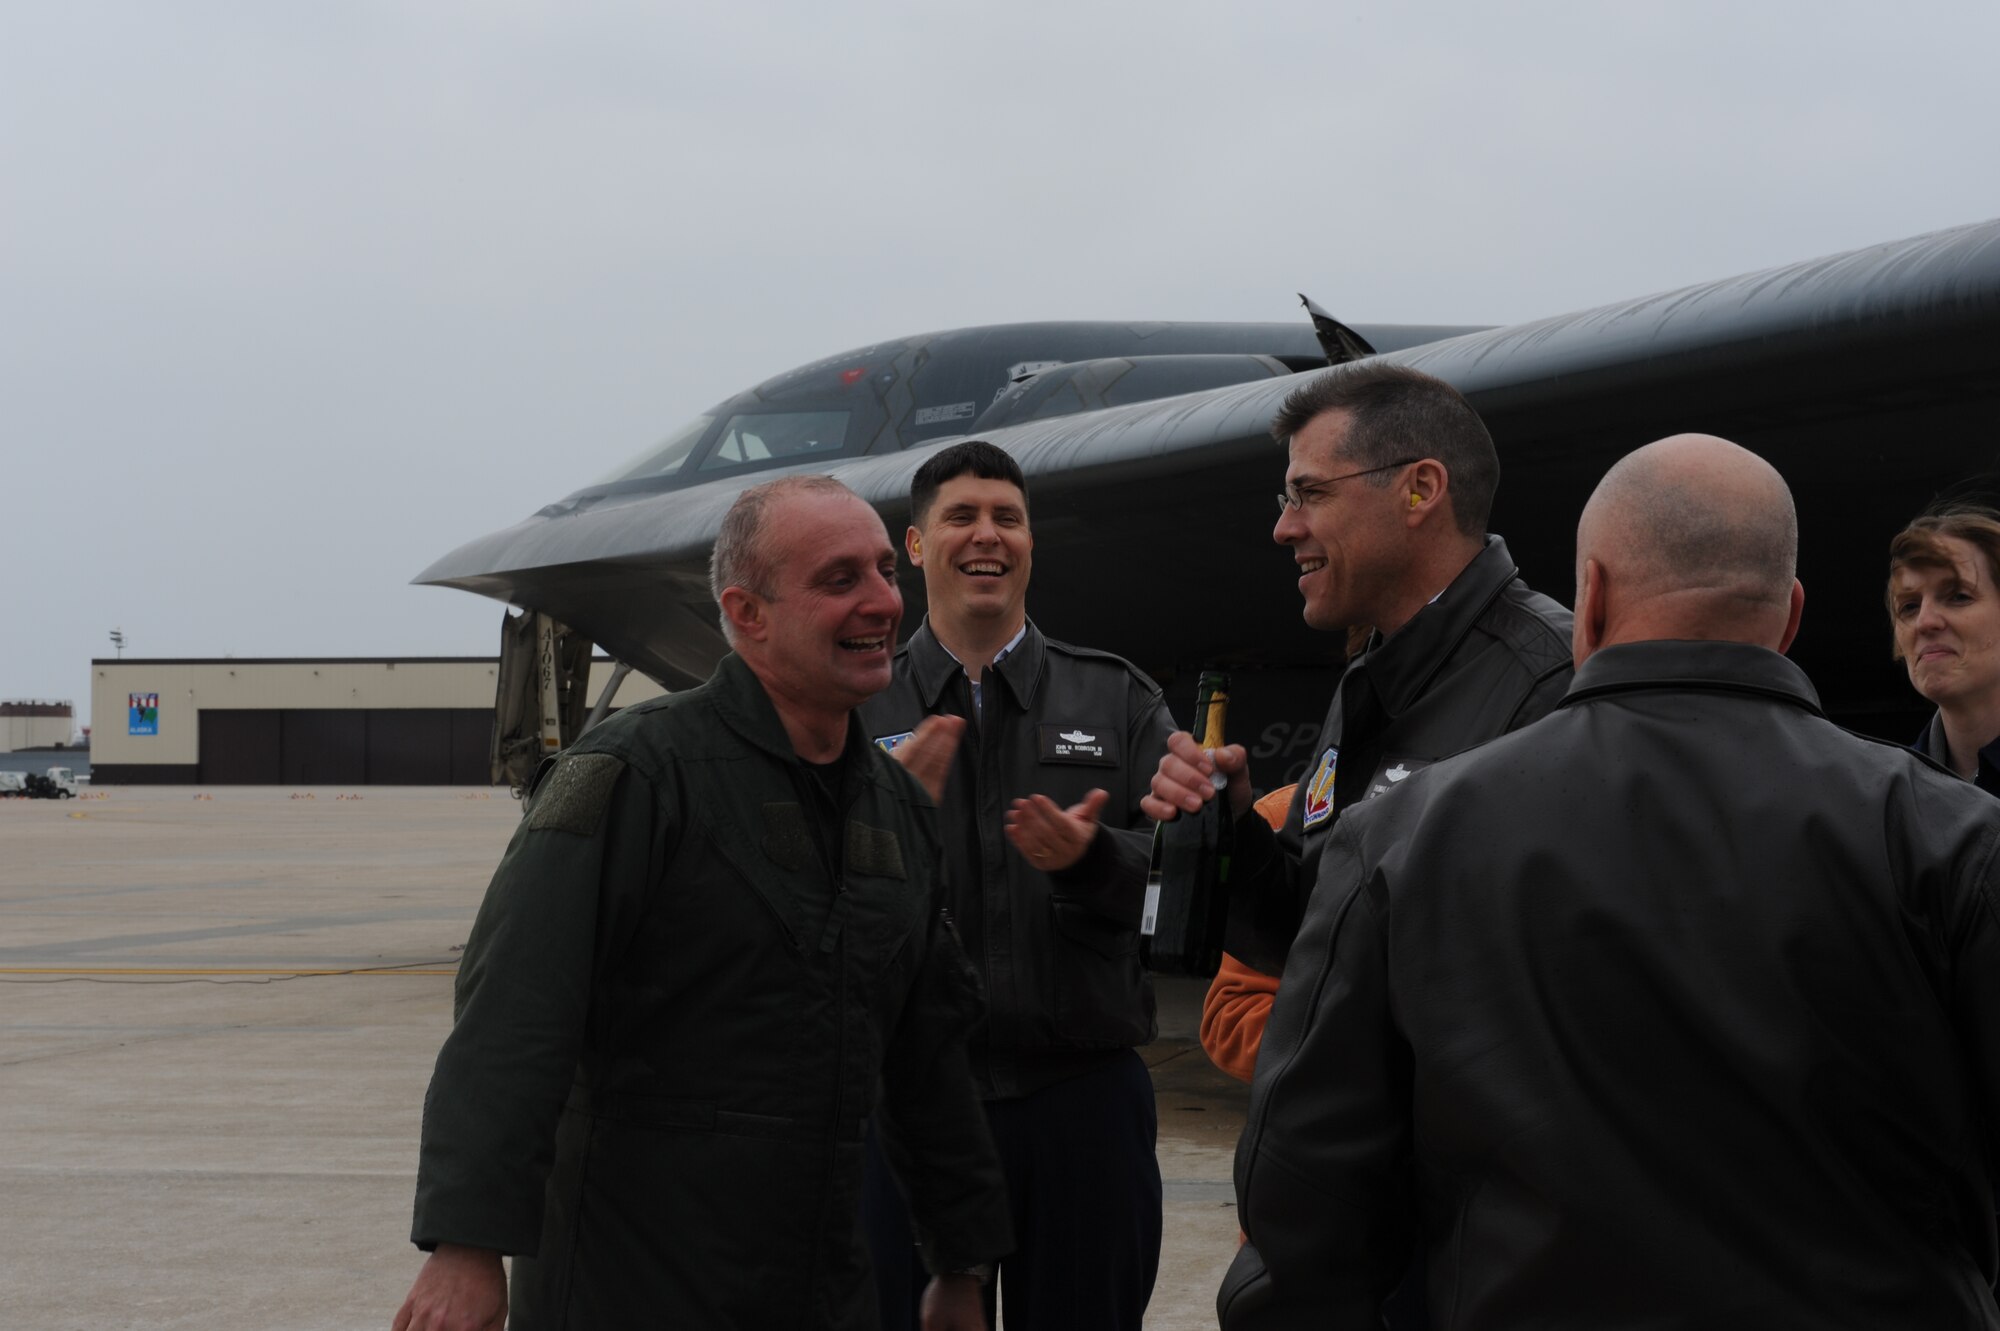 WHITEMAN AIR FORCE BASE, Mo. - Brig. Gen. Garrett Harencak (left), 509th Bomb Wing commander, is met by several members of Wing leadership following his end-of-tour B-2 flight March 9. General Harencak will pass command of the 509th Bomb Wing to Col. Robert Wheeler, 2d Bomb Wing commander Barksdale AFB, La., during a change-of-command ceremony March 26. (U.S. Air Force photo/Staff Sgt. Charles Larkin)